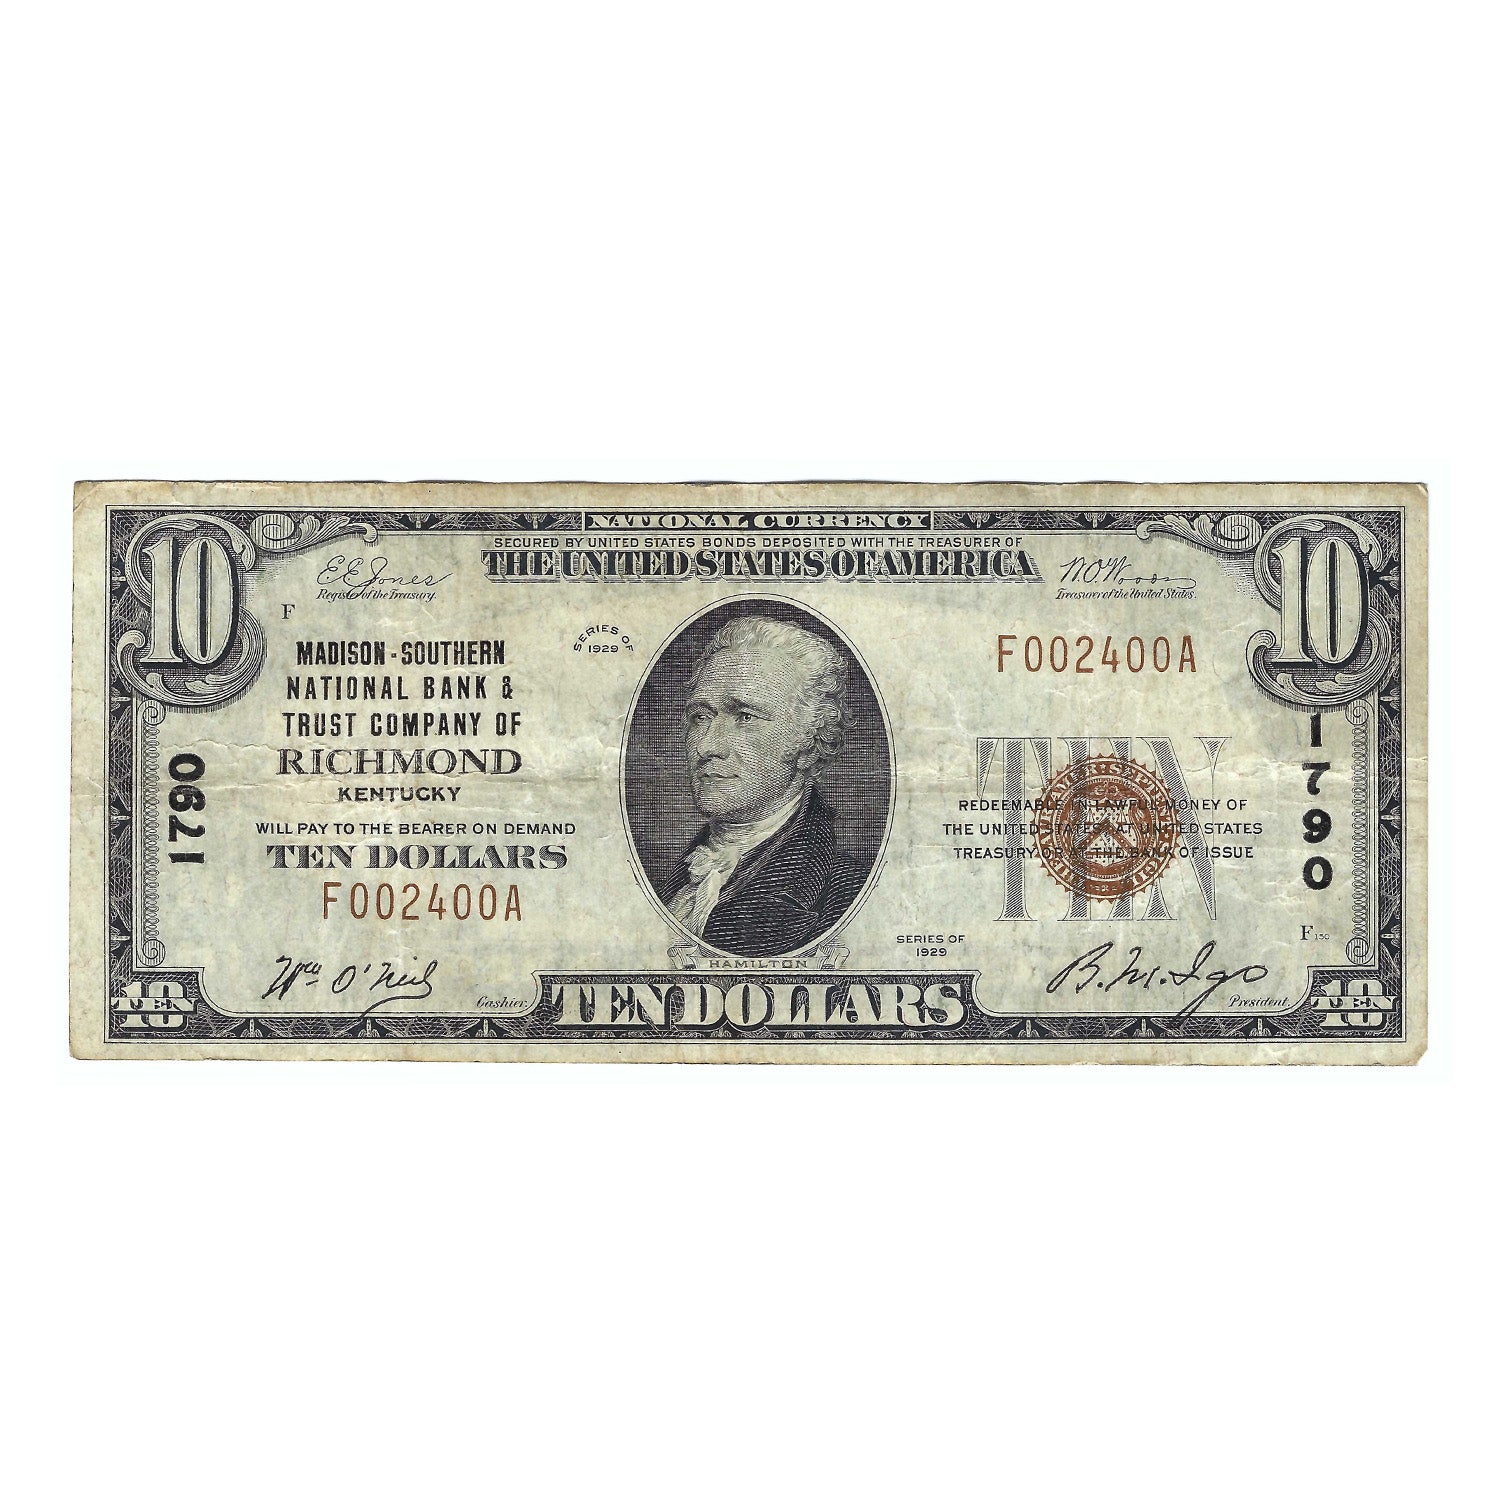 1929 $10 Sm Size National Bank Note, Madison-Southern NB and Trust Co., Richmond, KY Circulated